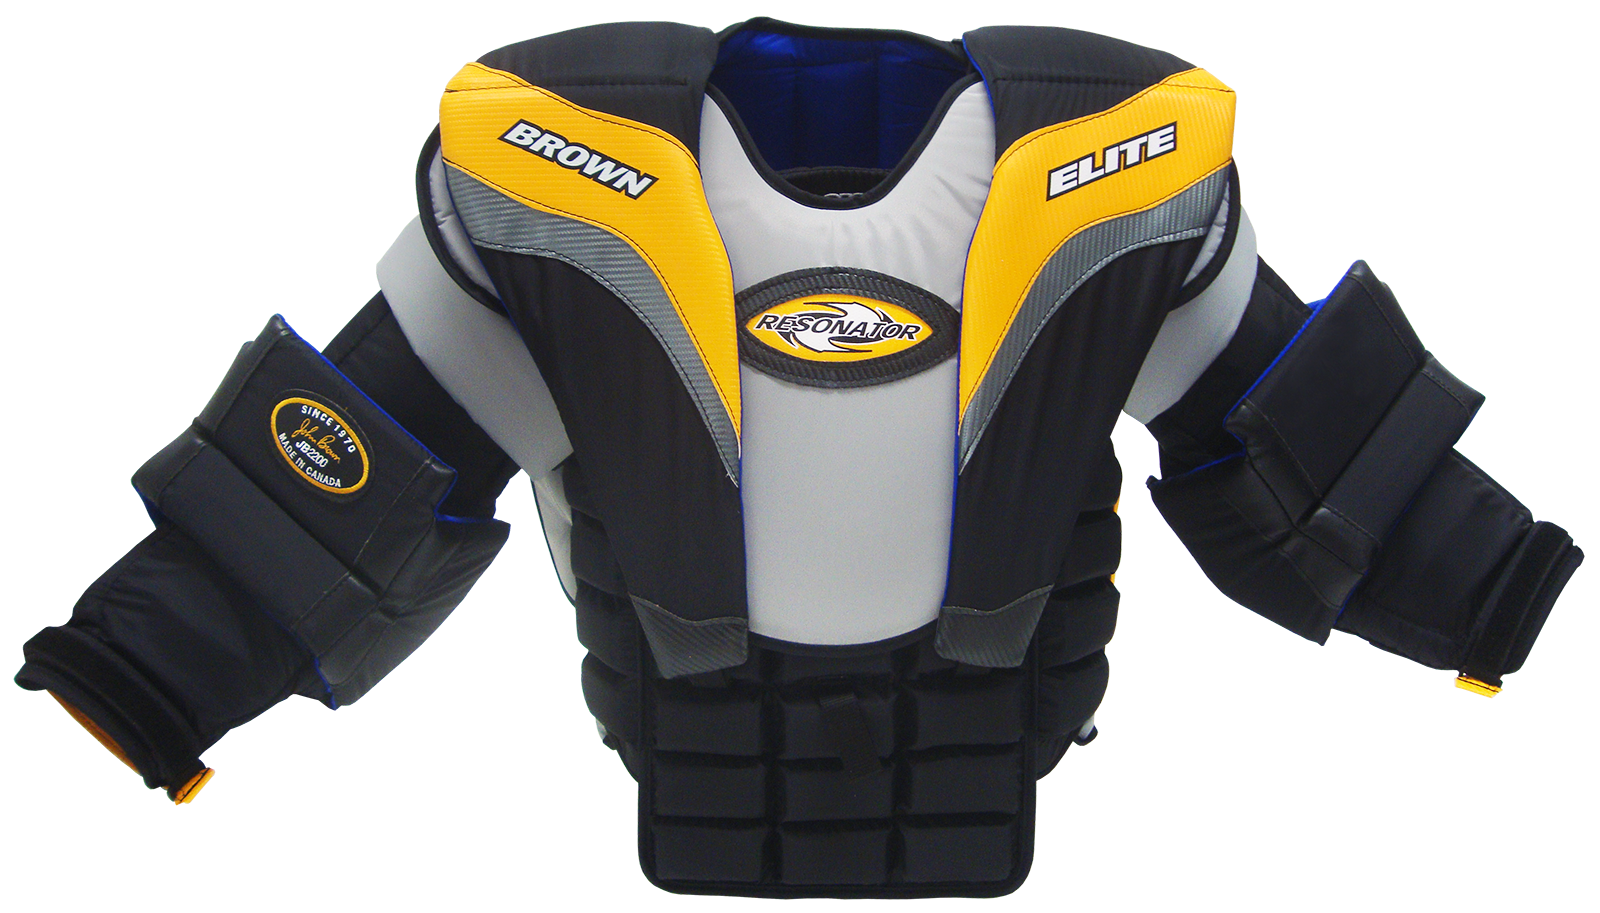 Front view of 2200 chest protector